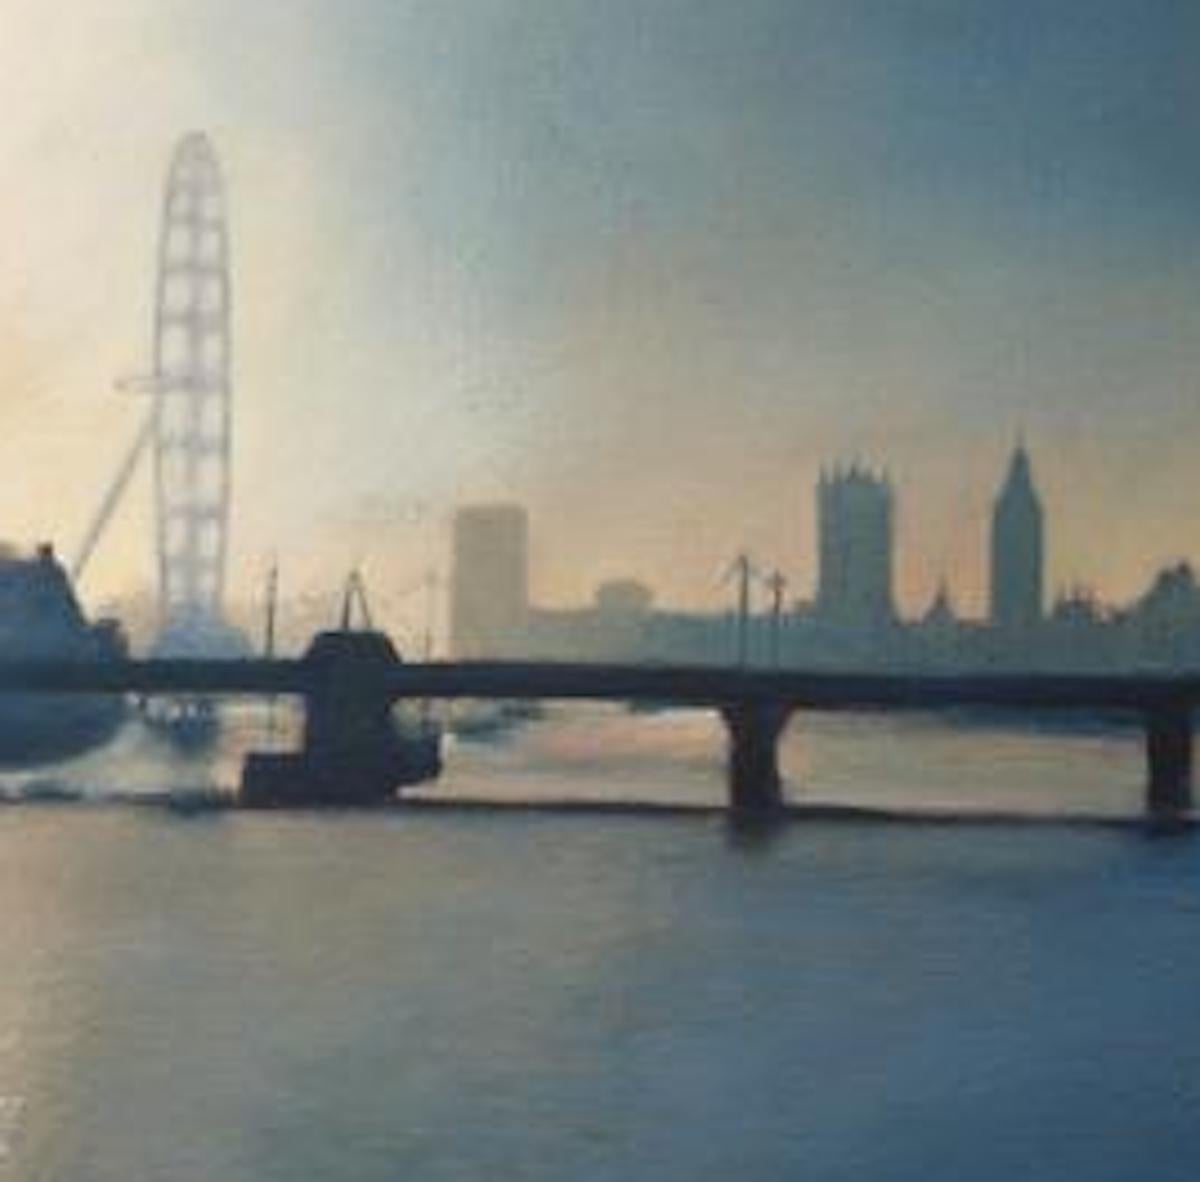 London Skyline painting. View across the Thames from Waterloo Bridge towards Charing X Bridge early morning in Winter. Oil on canvas,
unframed.
Artist Tim Woodcock-Jones original paintings are available for sale with Wychwood Art. Discover new